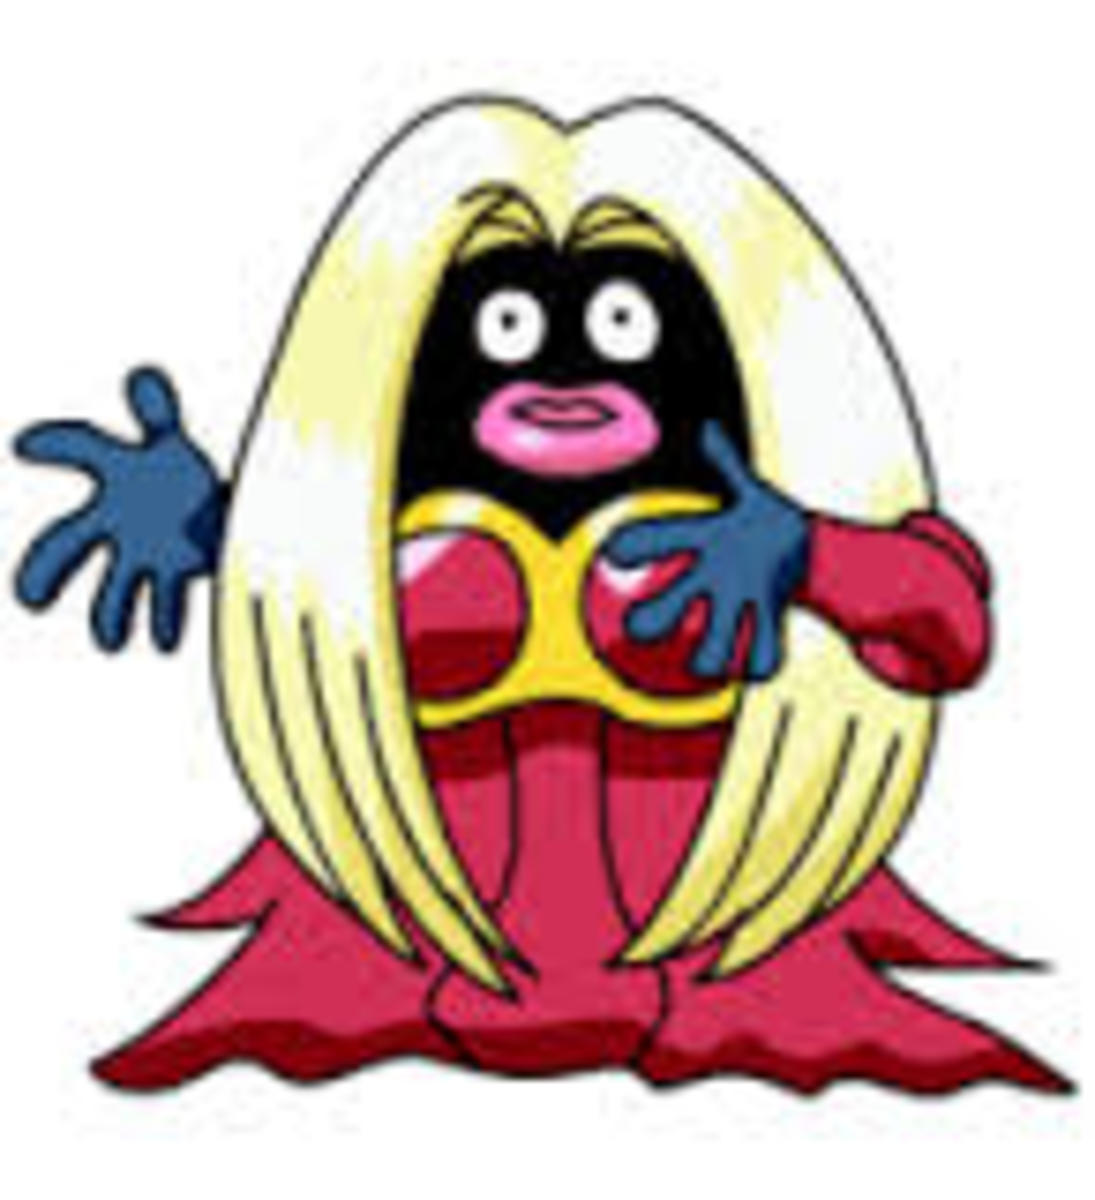 Note: Jynx was NOT intended to be a racial caricature or to represent the uniquely American phenomenon of "blackface", her appearance instead reflects the exaggerated makeup, dramatic expressions, and costuming of female opera singers. 